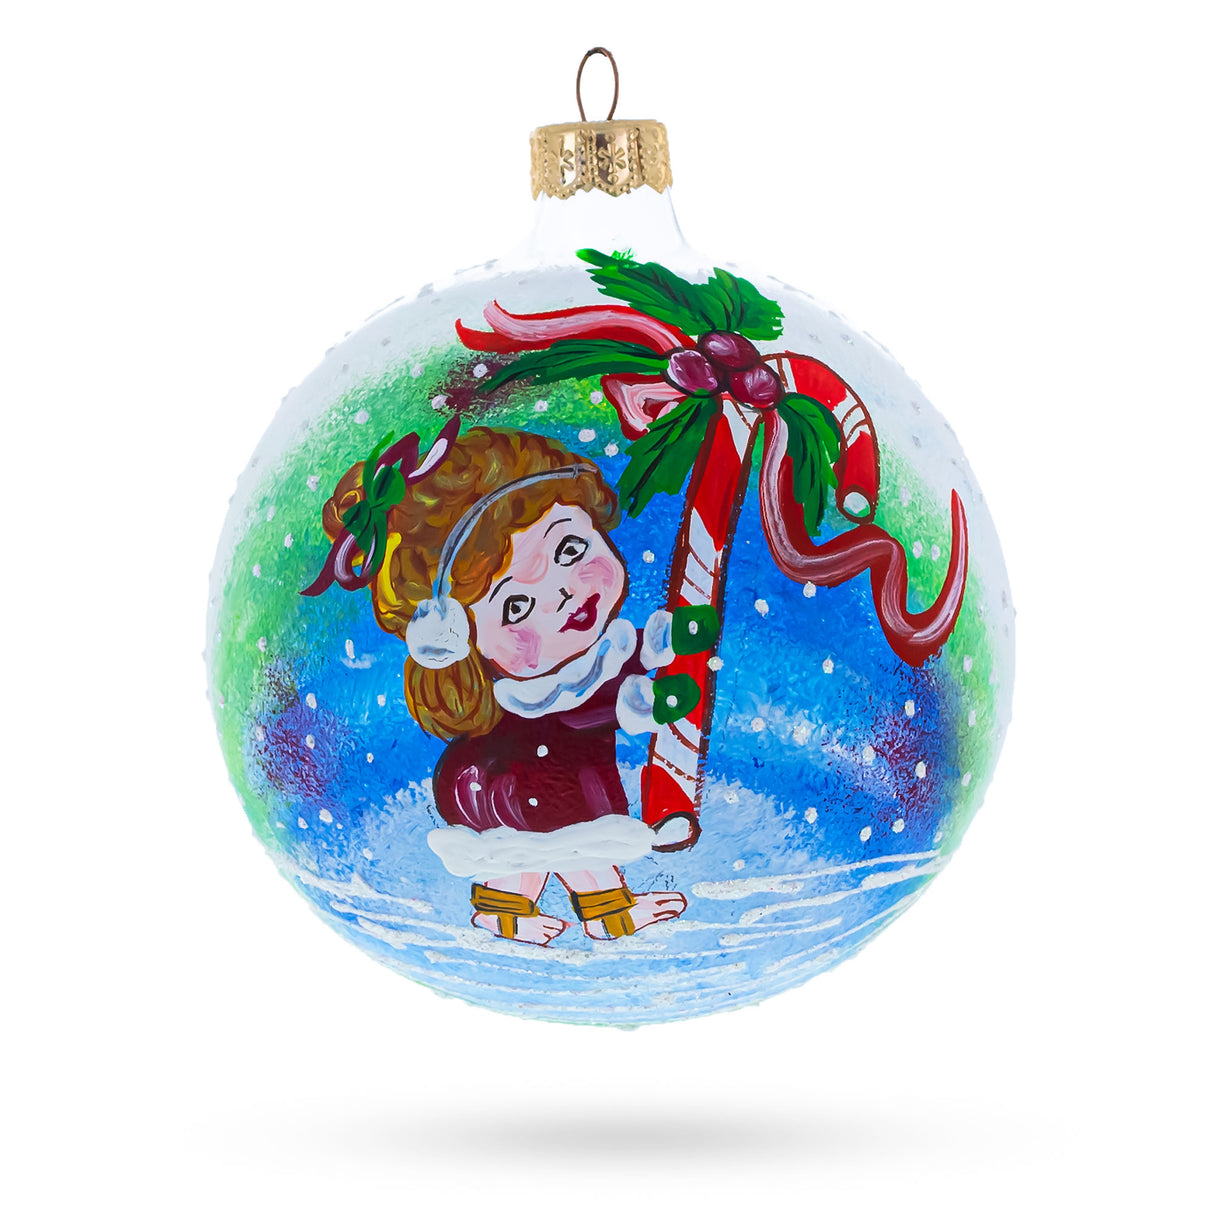 Sweet Holiday: Girl with Candy Cane - Blown Glass Ball Christmas Ornament 4 Inches in White color, Round shape